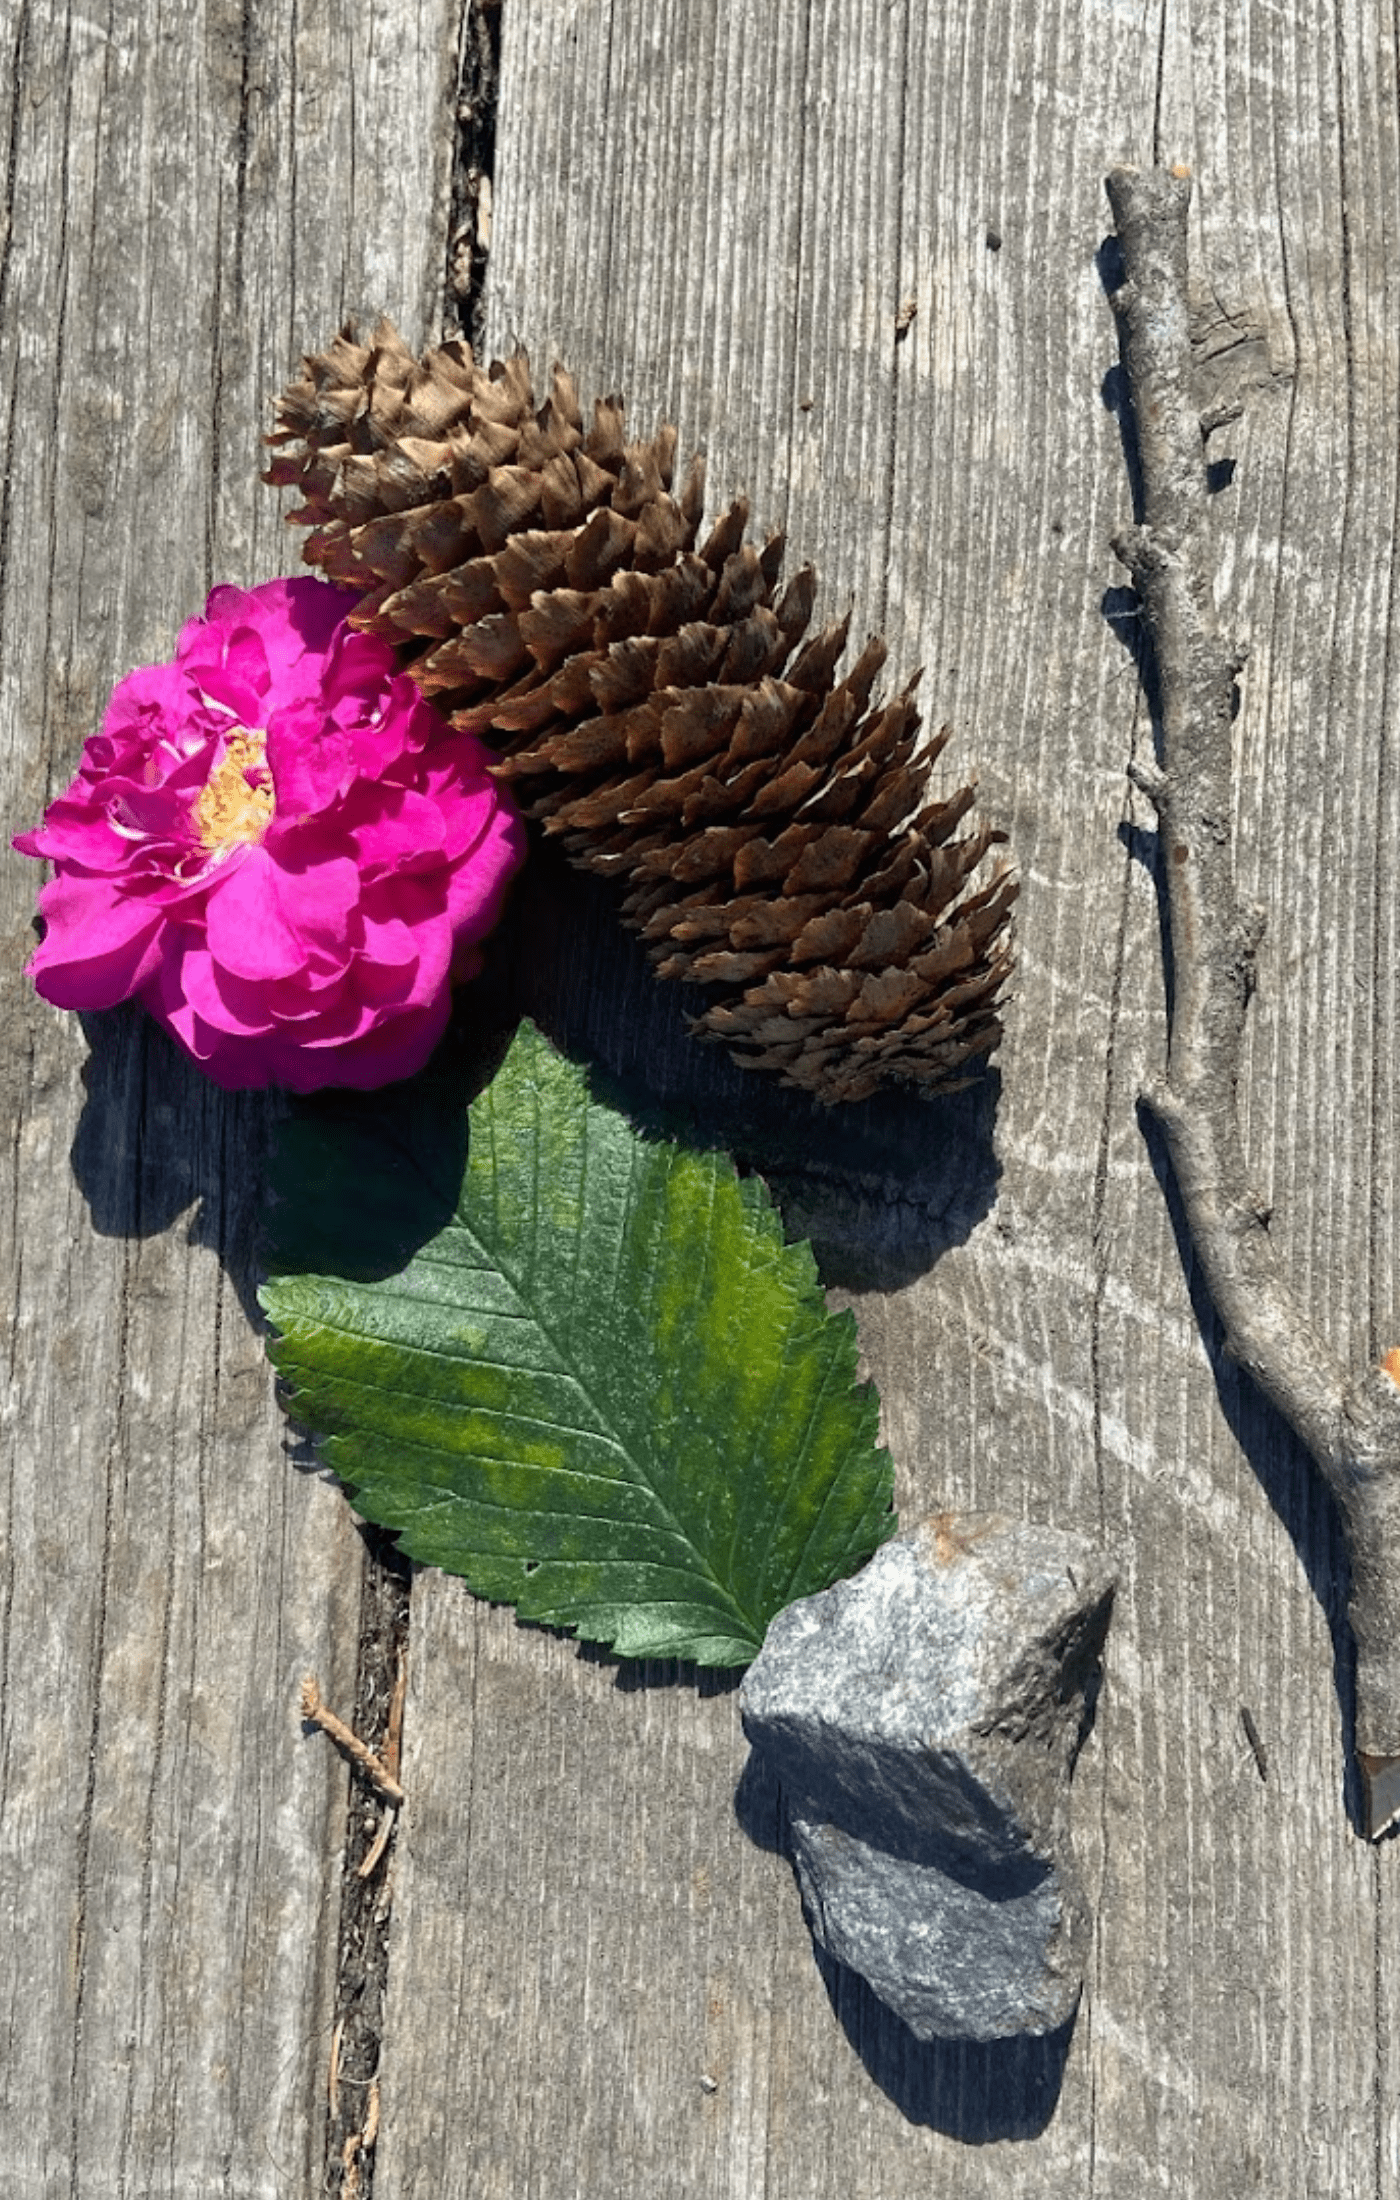 A pink rose, a pinecone, a green leaf, a rock and a twig on a wooden backdrop.